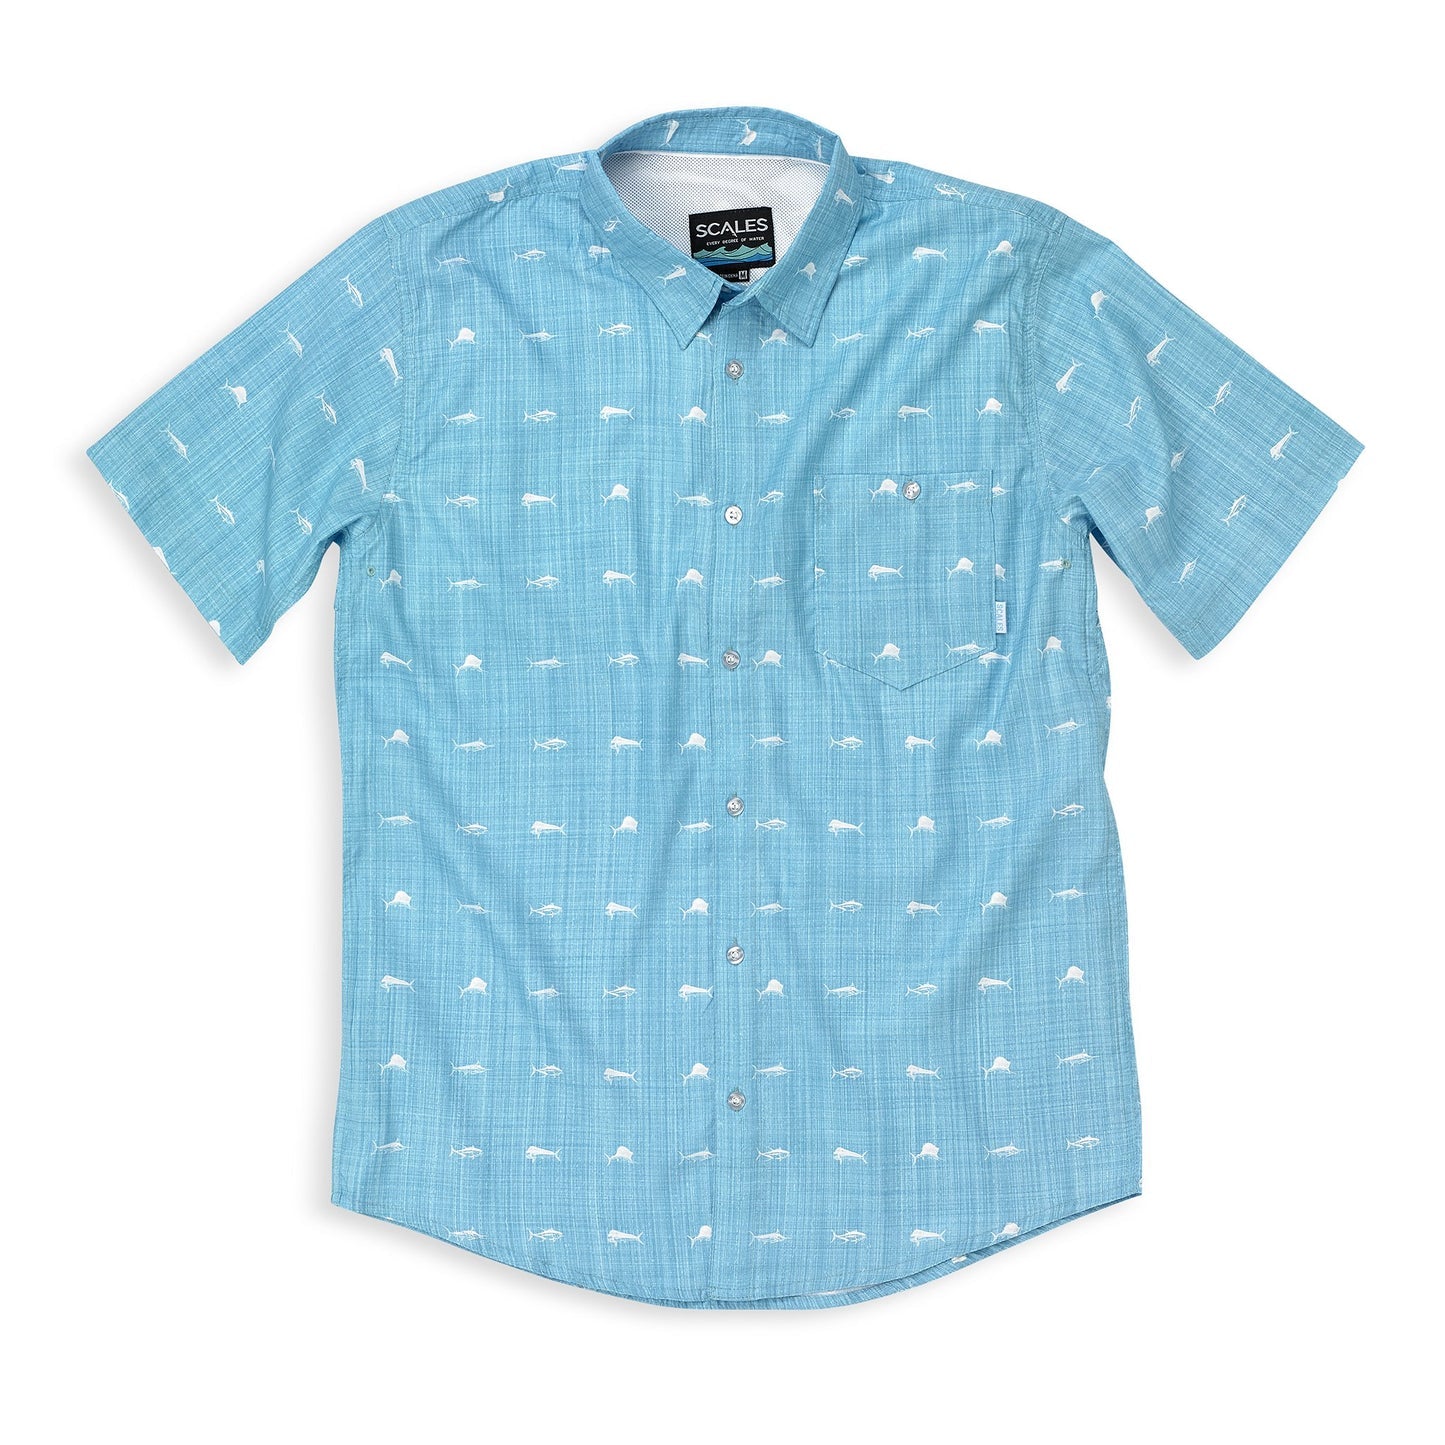 SCALES Clean Fish Performance Button Down Shirt